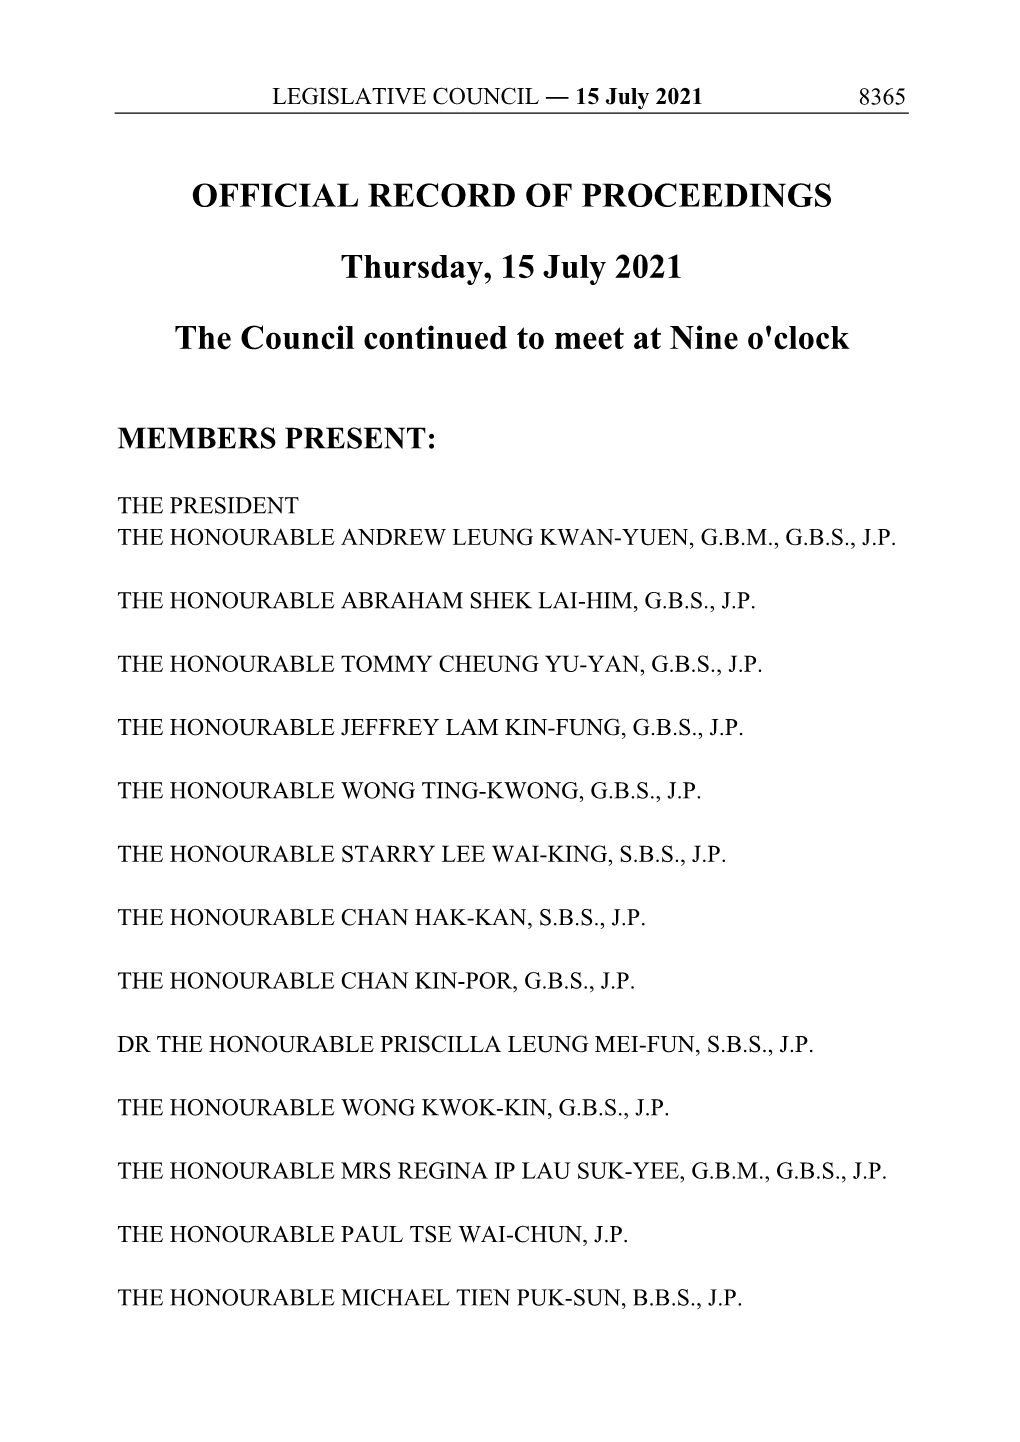 OFFICIAL RECORD of PROCEEDINGS Thursday, 15 July